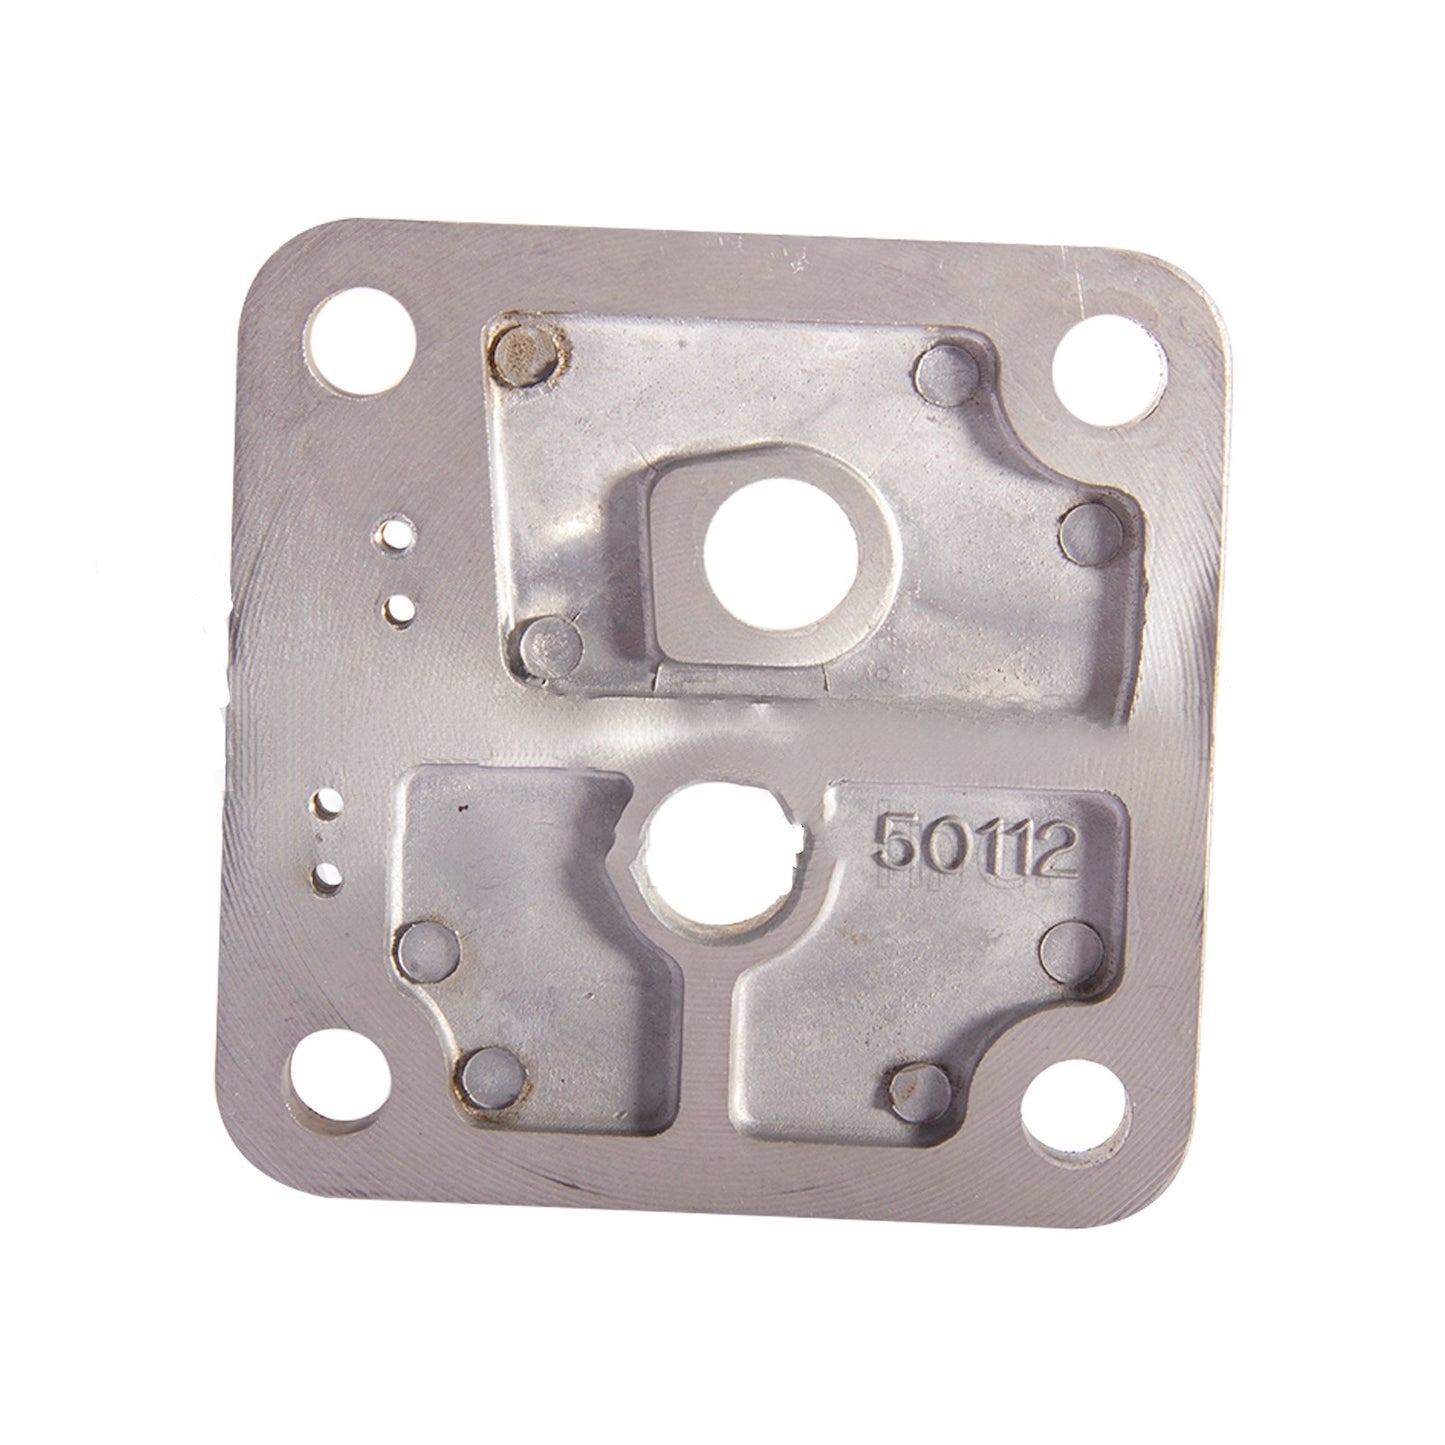 51121 2101 Valve Plate For PS25 PV01A Pumps